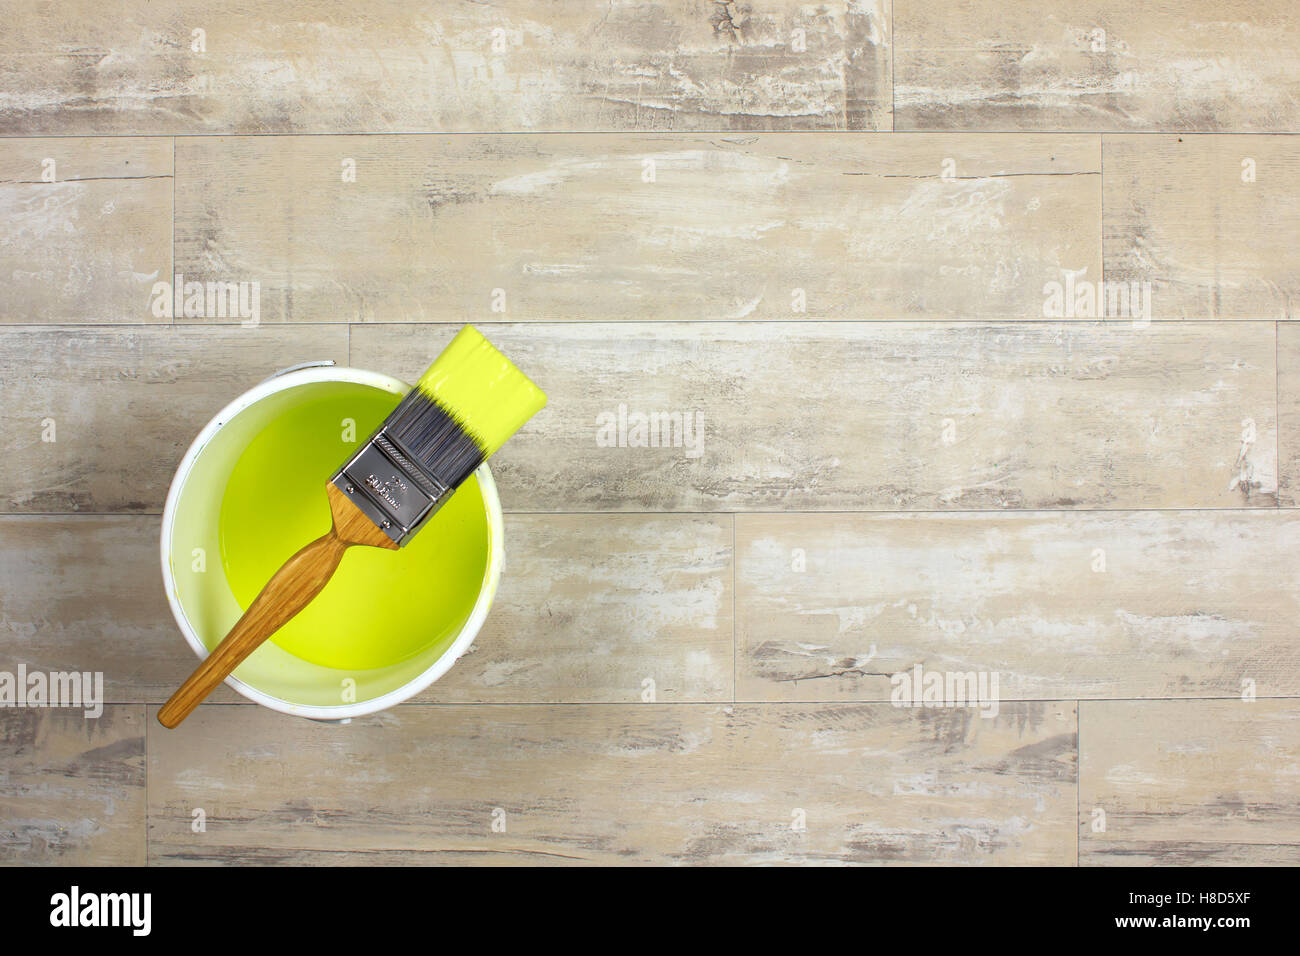 Loaded paintbrush placed across a white paint kettle filled with lime green paint on a shabby style wood floor Stock Photo